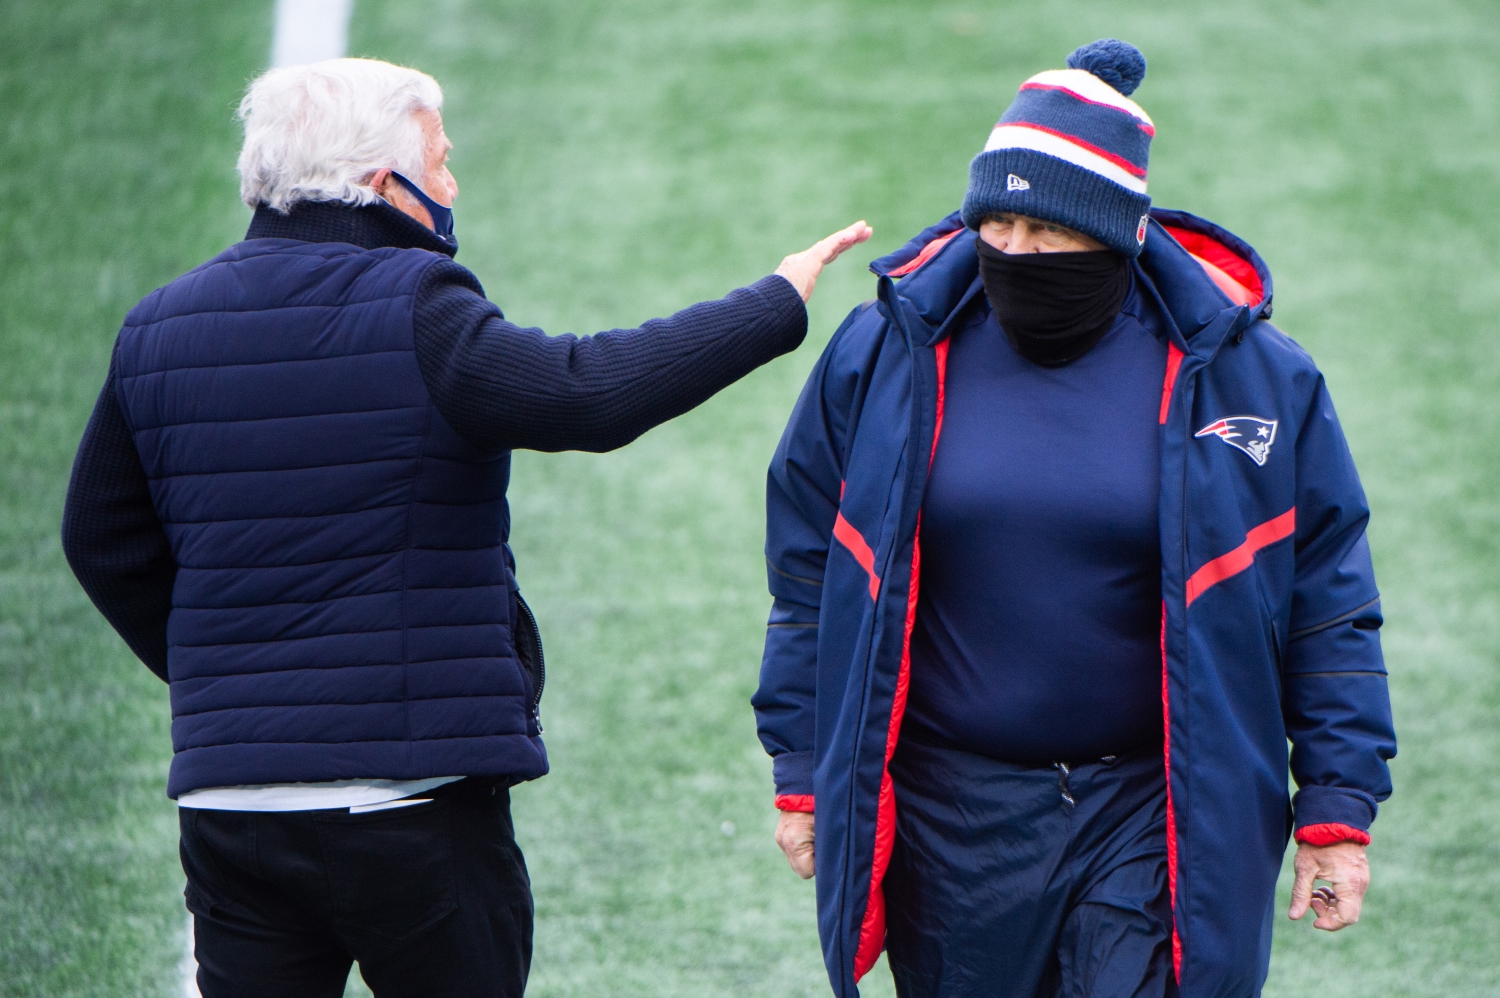 Robert Kraft taps New England Patriots head coach Bill Belichick on the shoulder as they walk by each other.